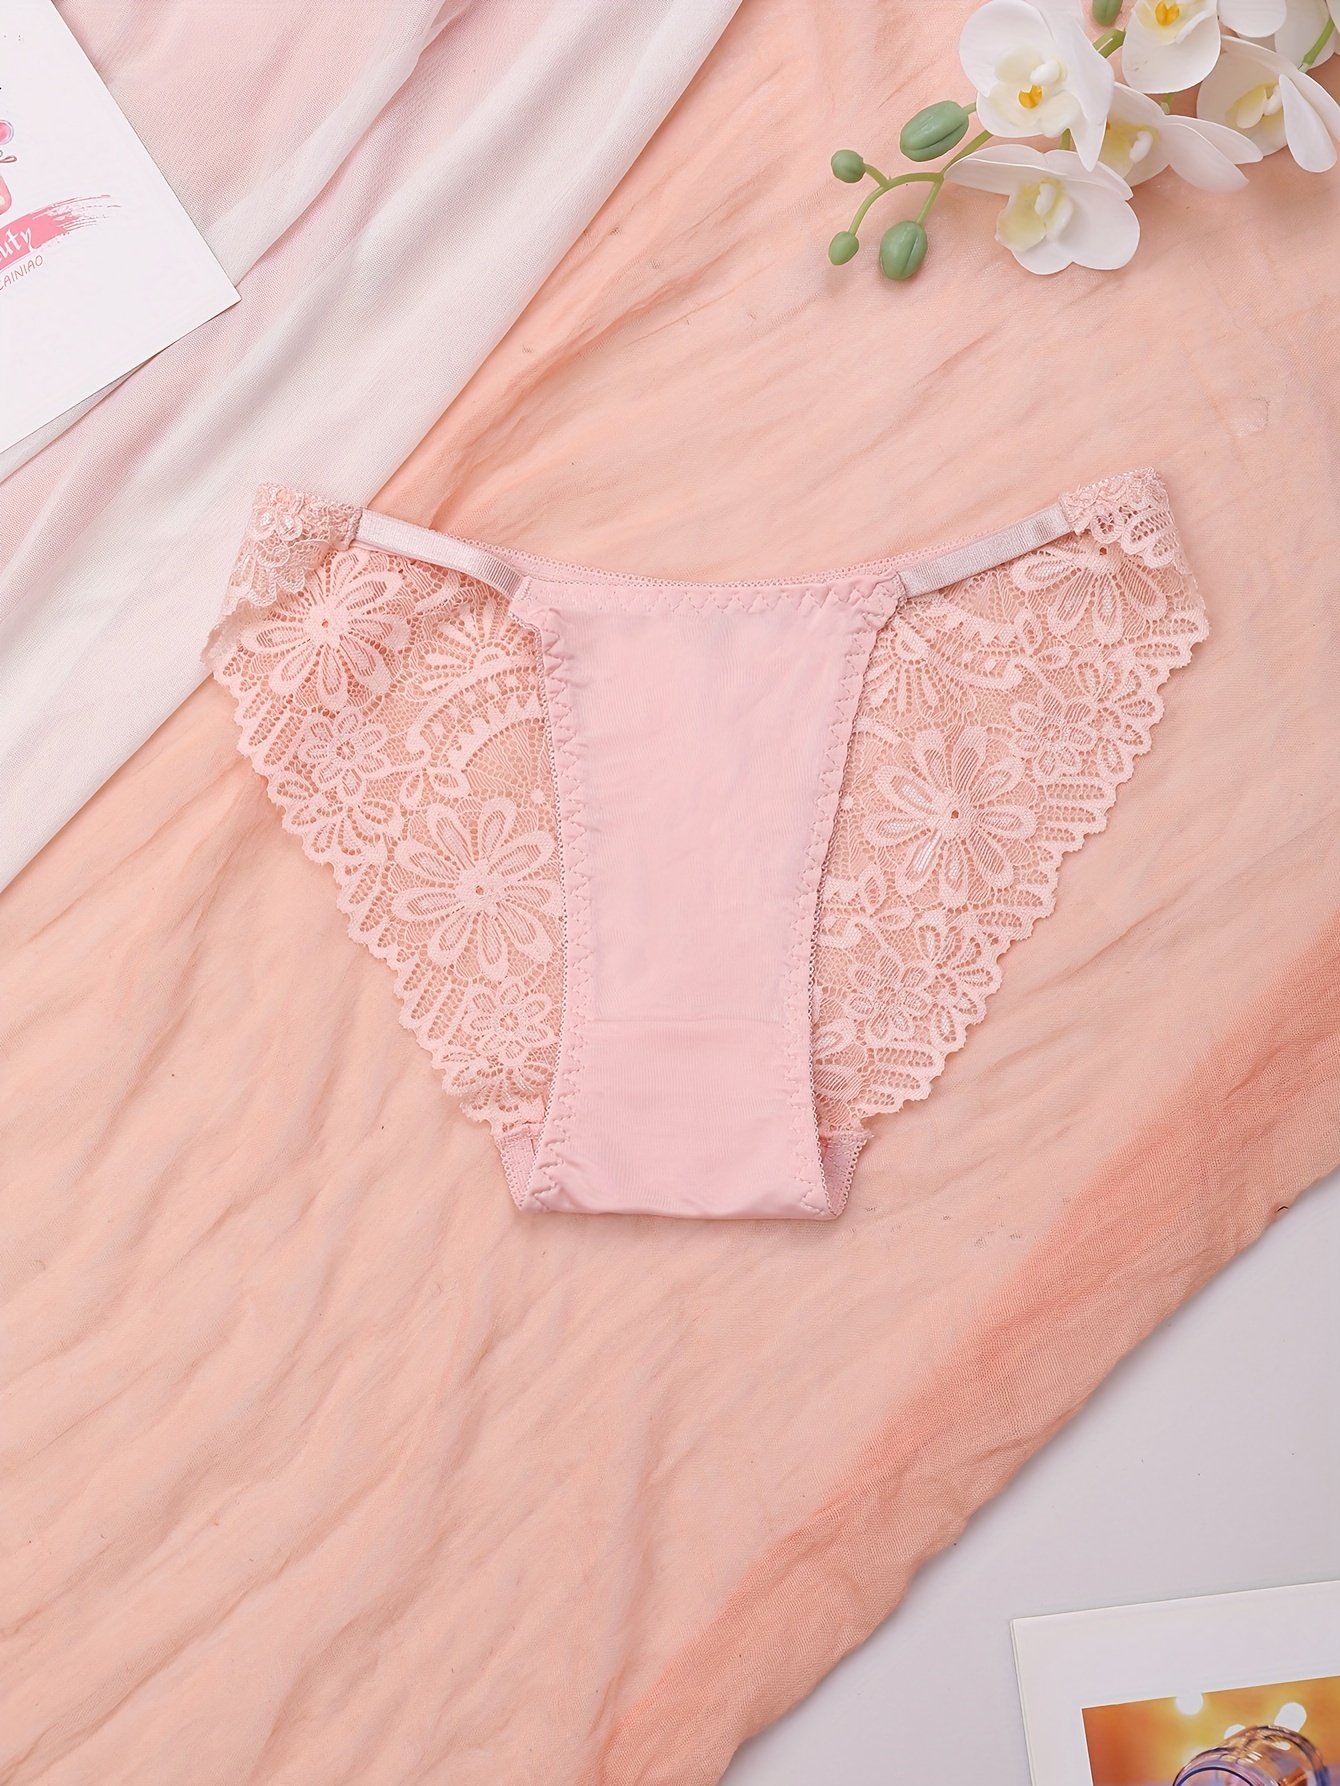 JDEFEG Most Comfortable Womens Underwear Womens Lace Trim Breathable Comfort  Waist Panties Days Of The Underwear Women Plus Size Lace Pink L 